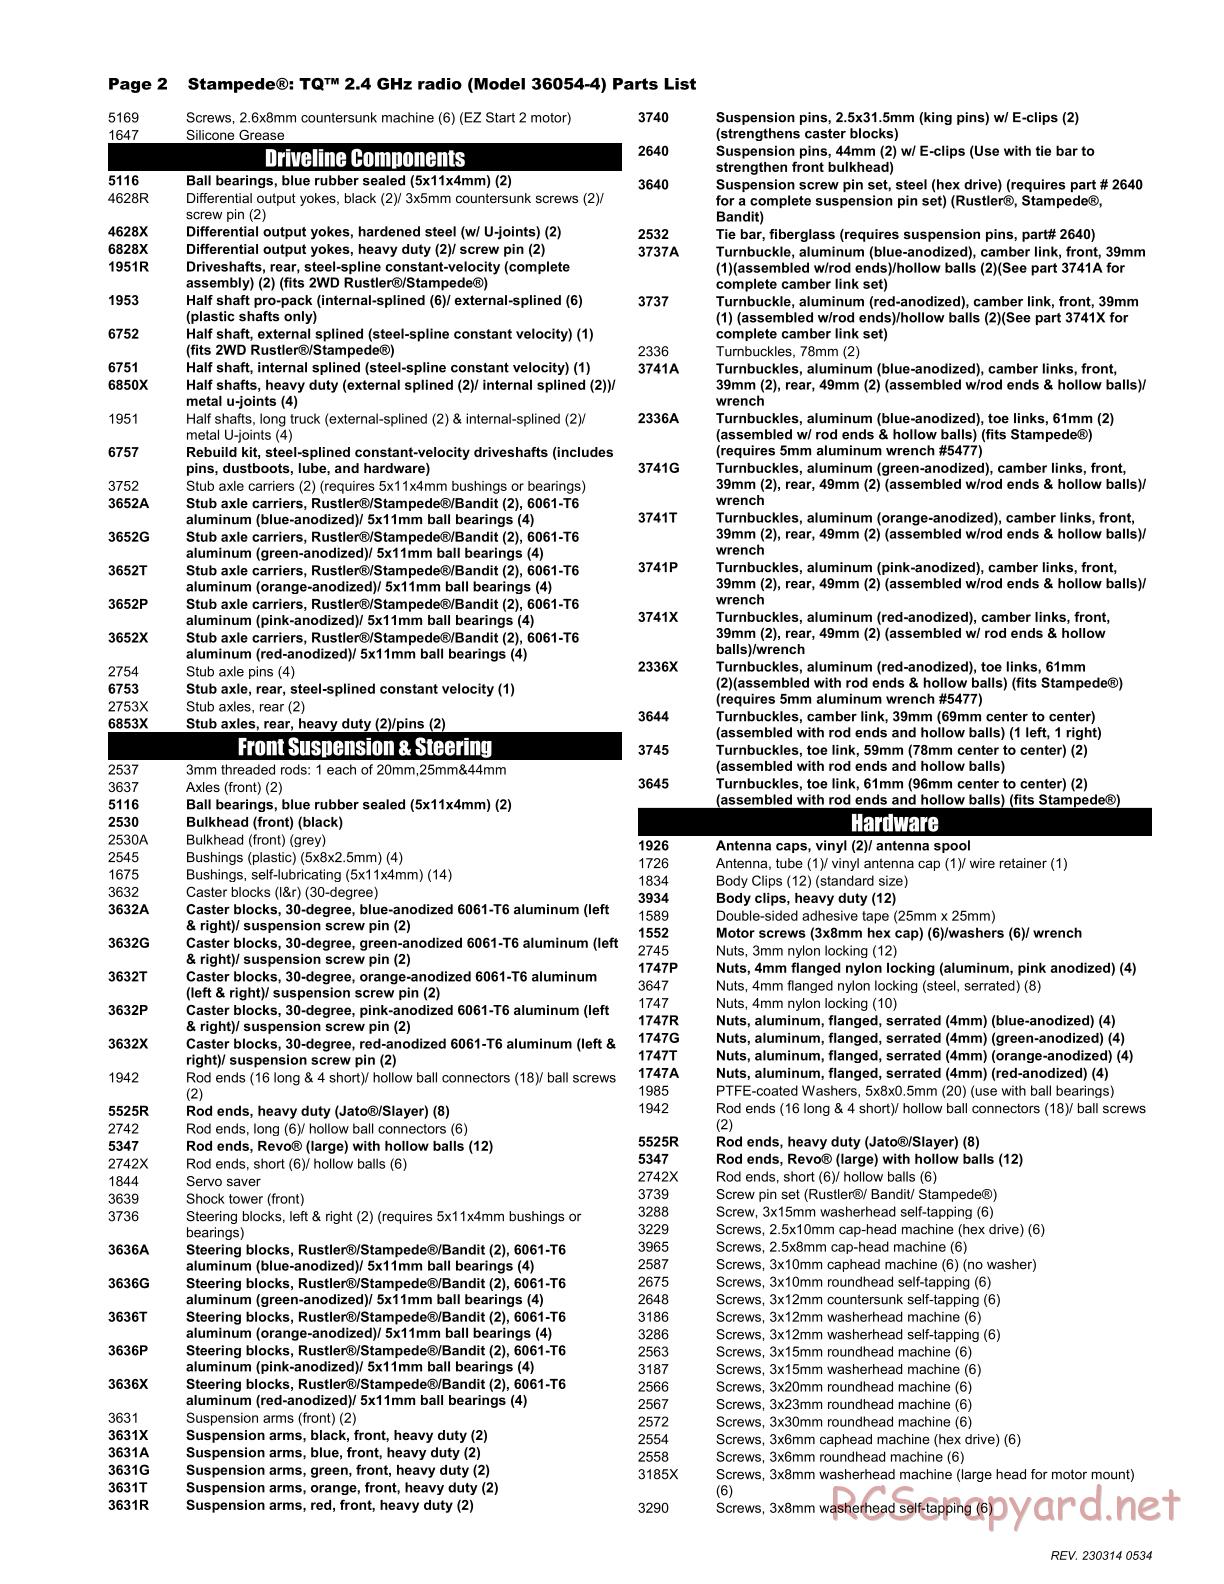 Traxxas - Stampede XL-5 (2018) - Parts List - Page 2